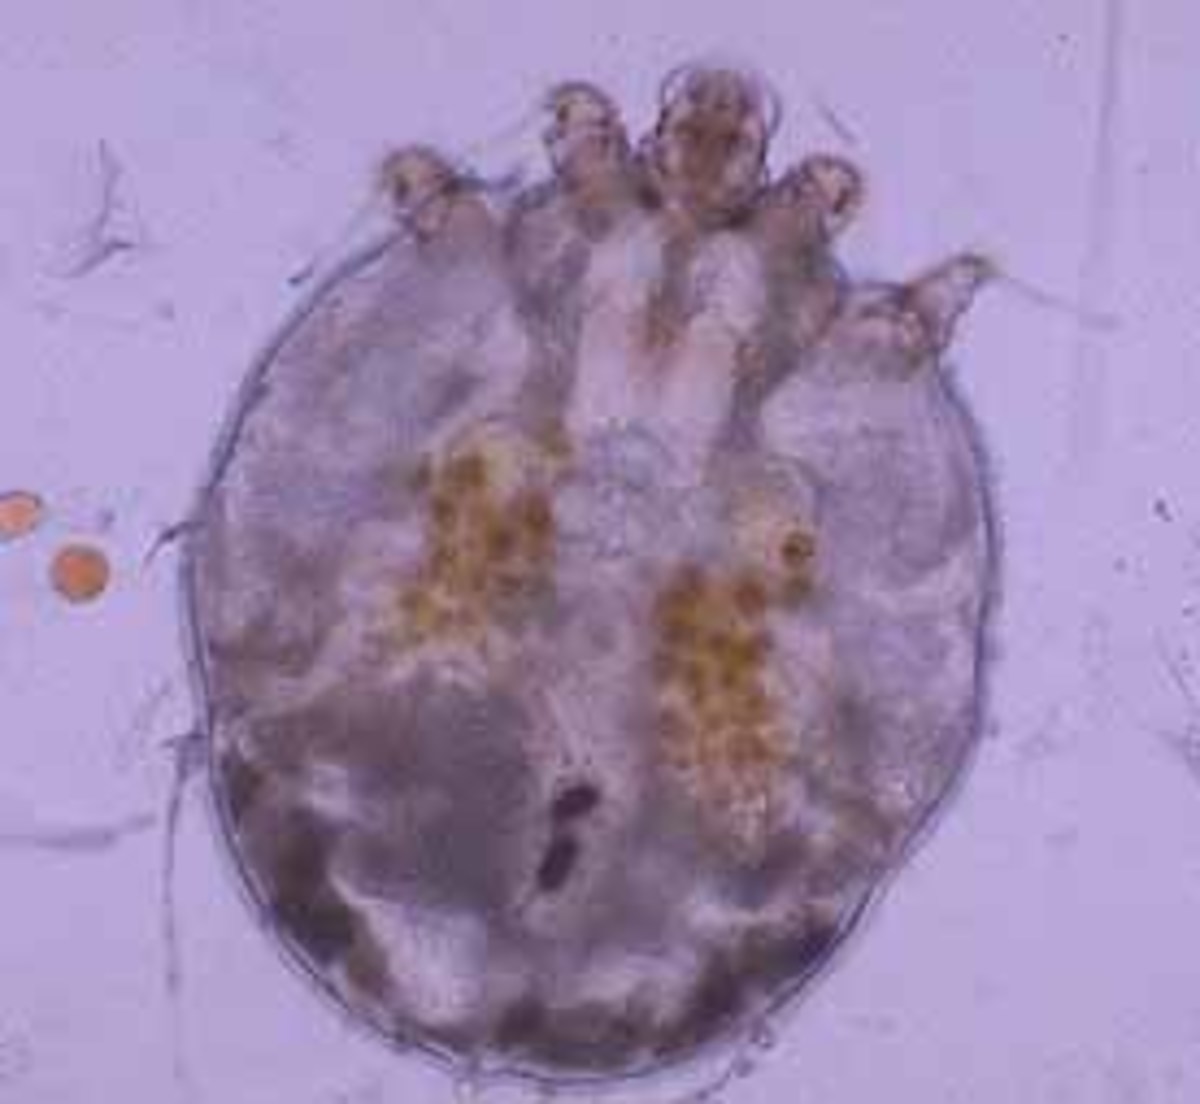 Parasite Sarcoptes scabiei which causes scabies